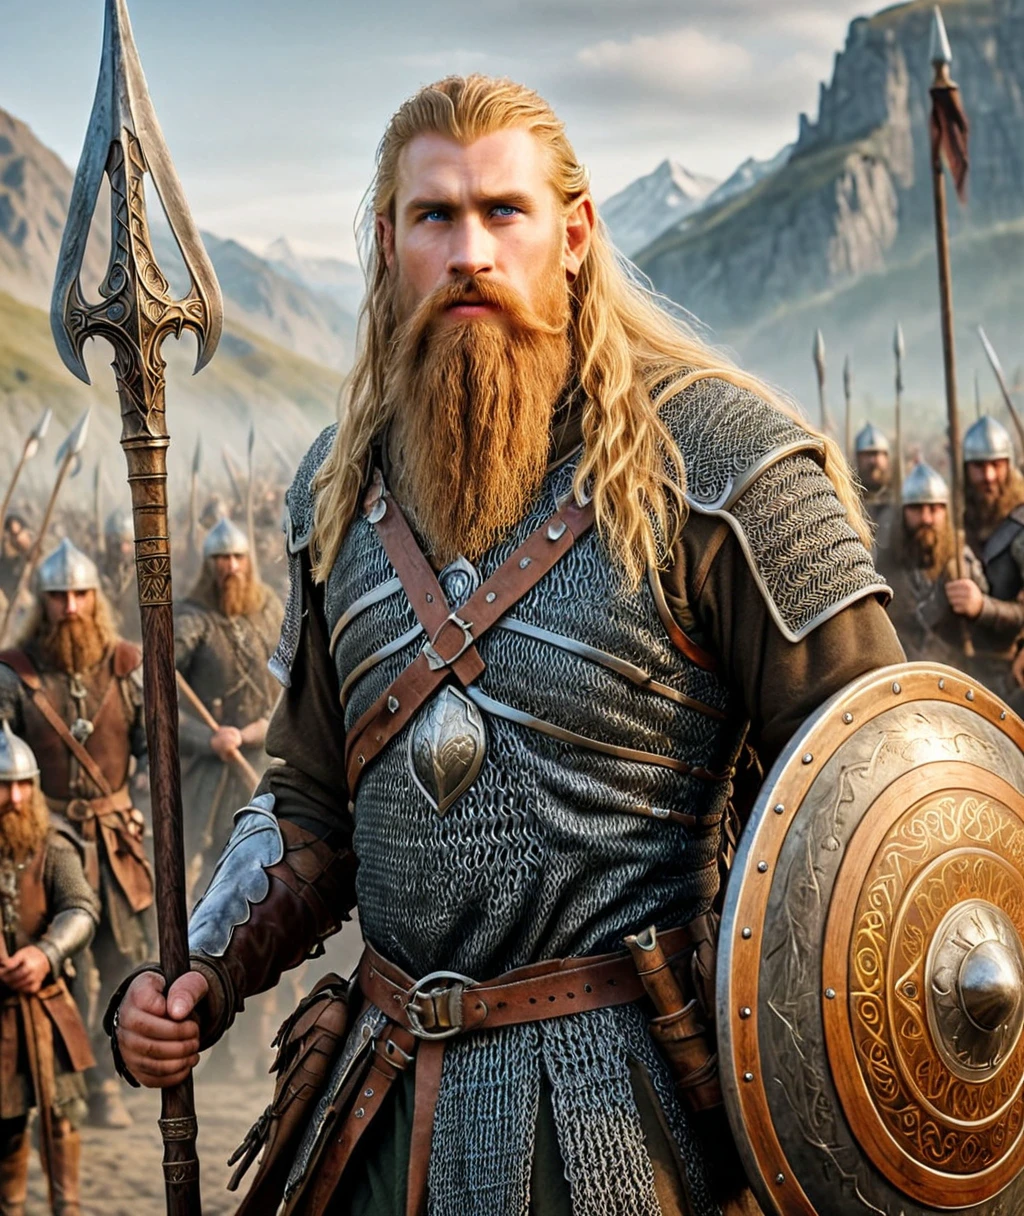 a cinematic (full body shot:1.1) of a rohirrim Horseman holding a (spear and a wooden round shield:1.1), chain mail and leather decorated armor, (brown leather chest-armor:1.2), long blonde hair wild and windy, big very long braided beard, horse ornaments, rohirrim fort in background, plains, Rohan, middle-earth, (hkstyle:1.), rohirrim riders, Lord of the Rings style, 8k, HDR, UHD, insane details, award-winning photo, Cinematic Hollywood Film style, hand